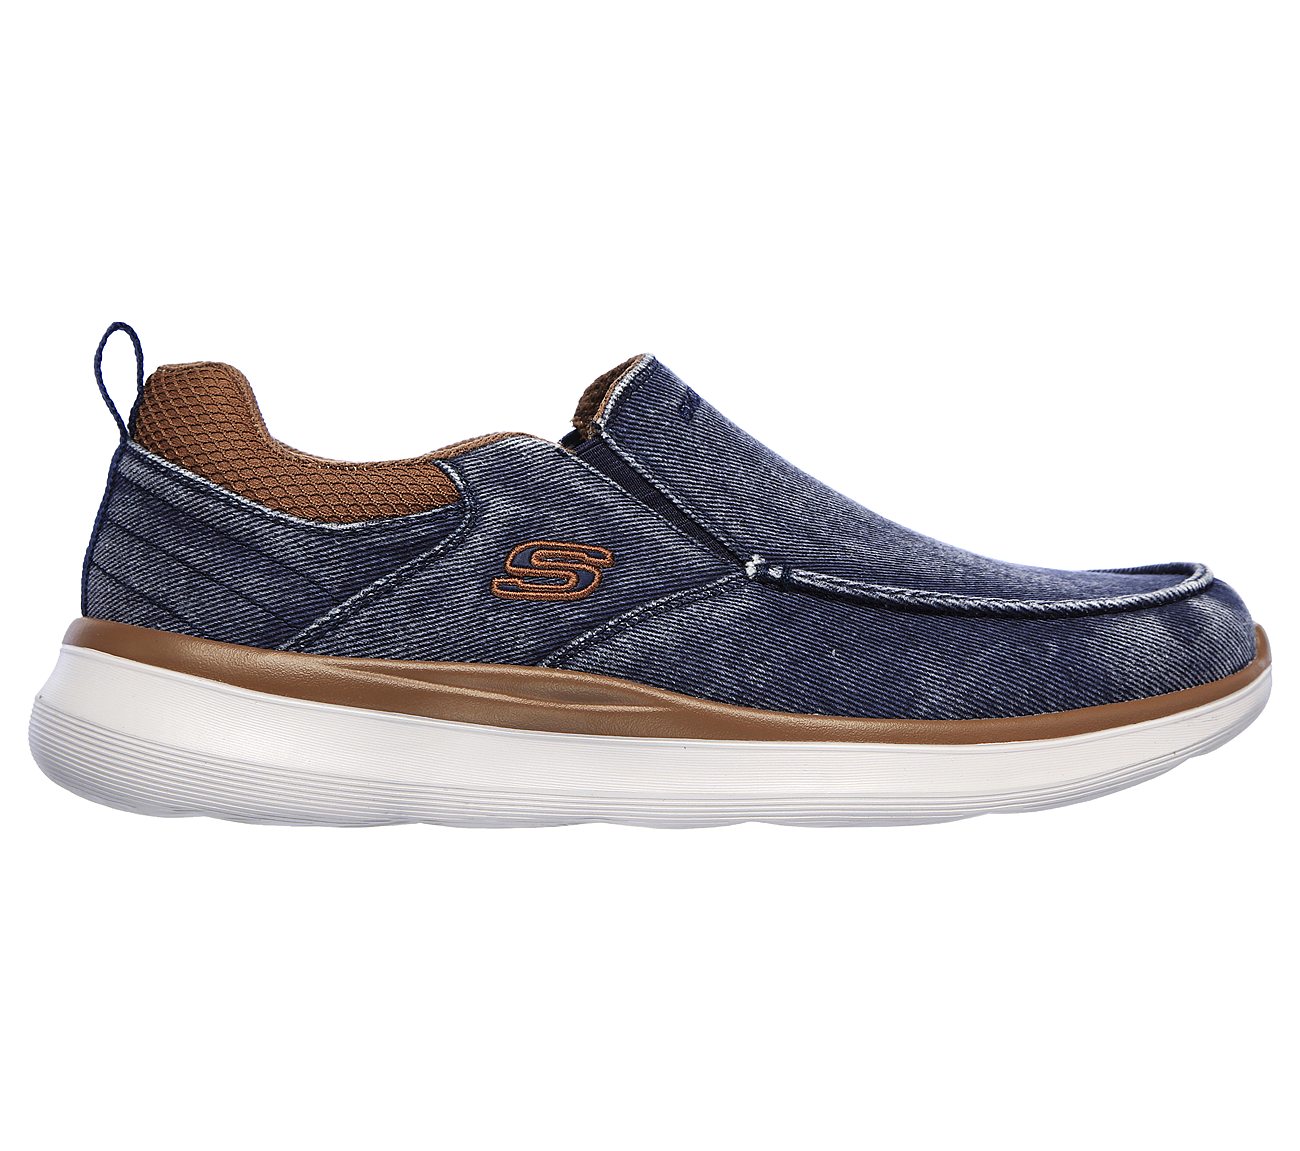 Buy SKECHERS Delson 2.0 - Larwin USA Casuals Shoes